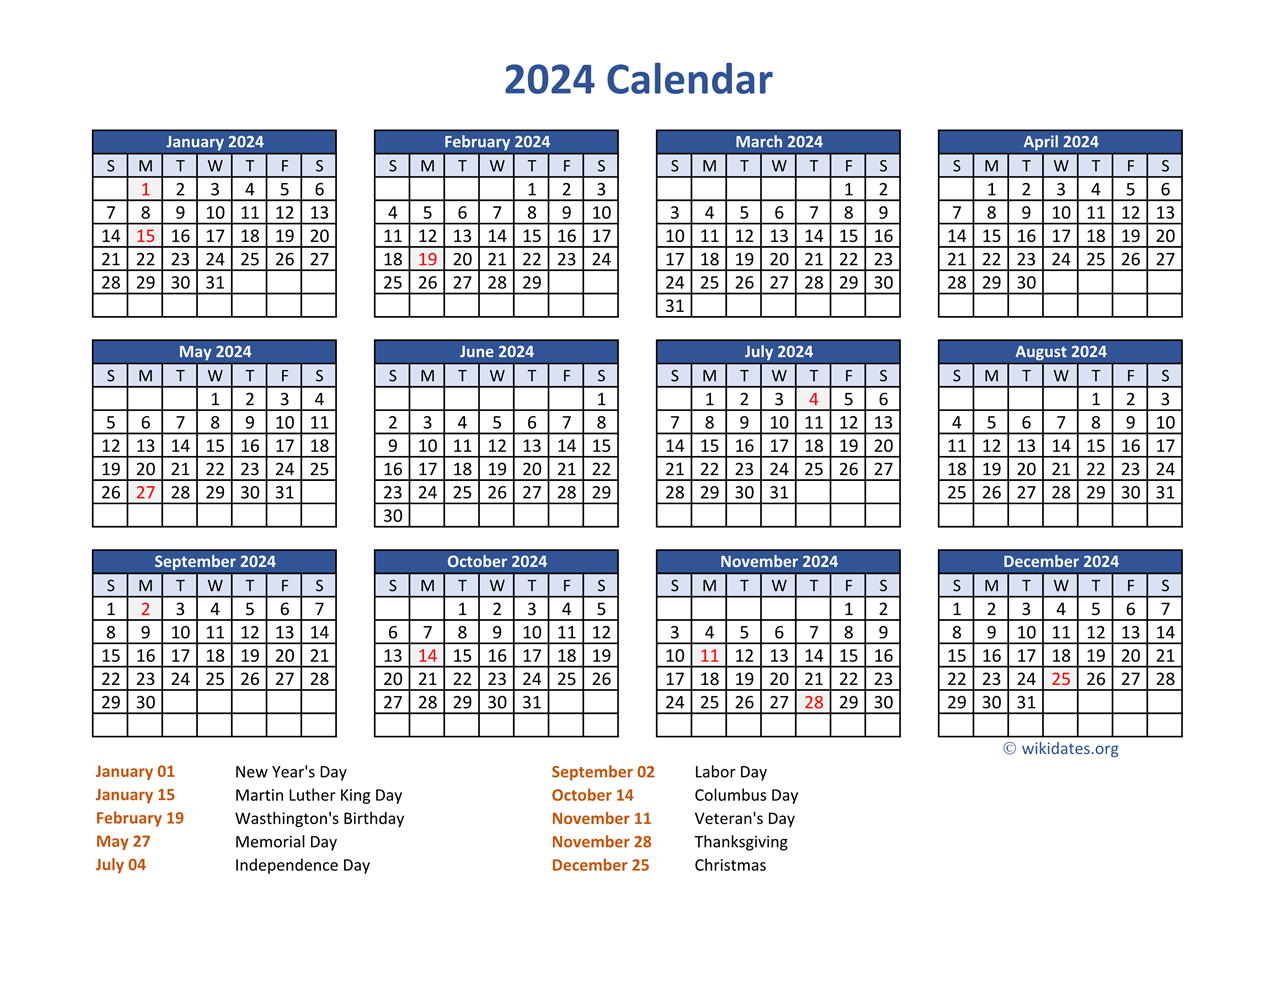 Pdf Calendar 2024 With Federal Holidays | Wikidates for 2024 Calendar With Holidays Free Printable